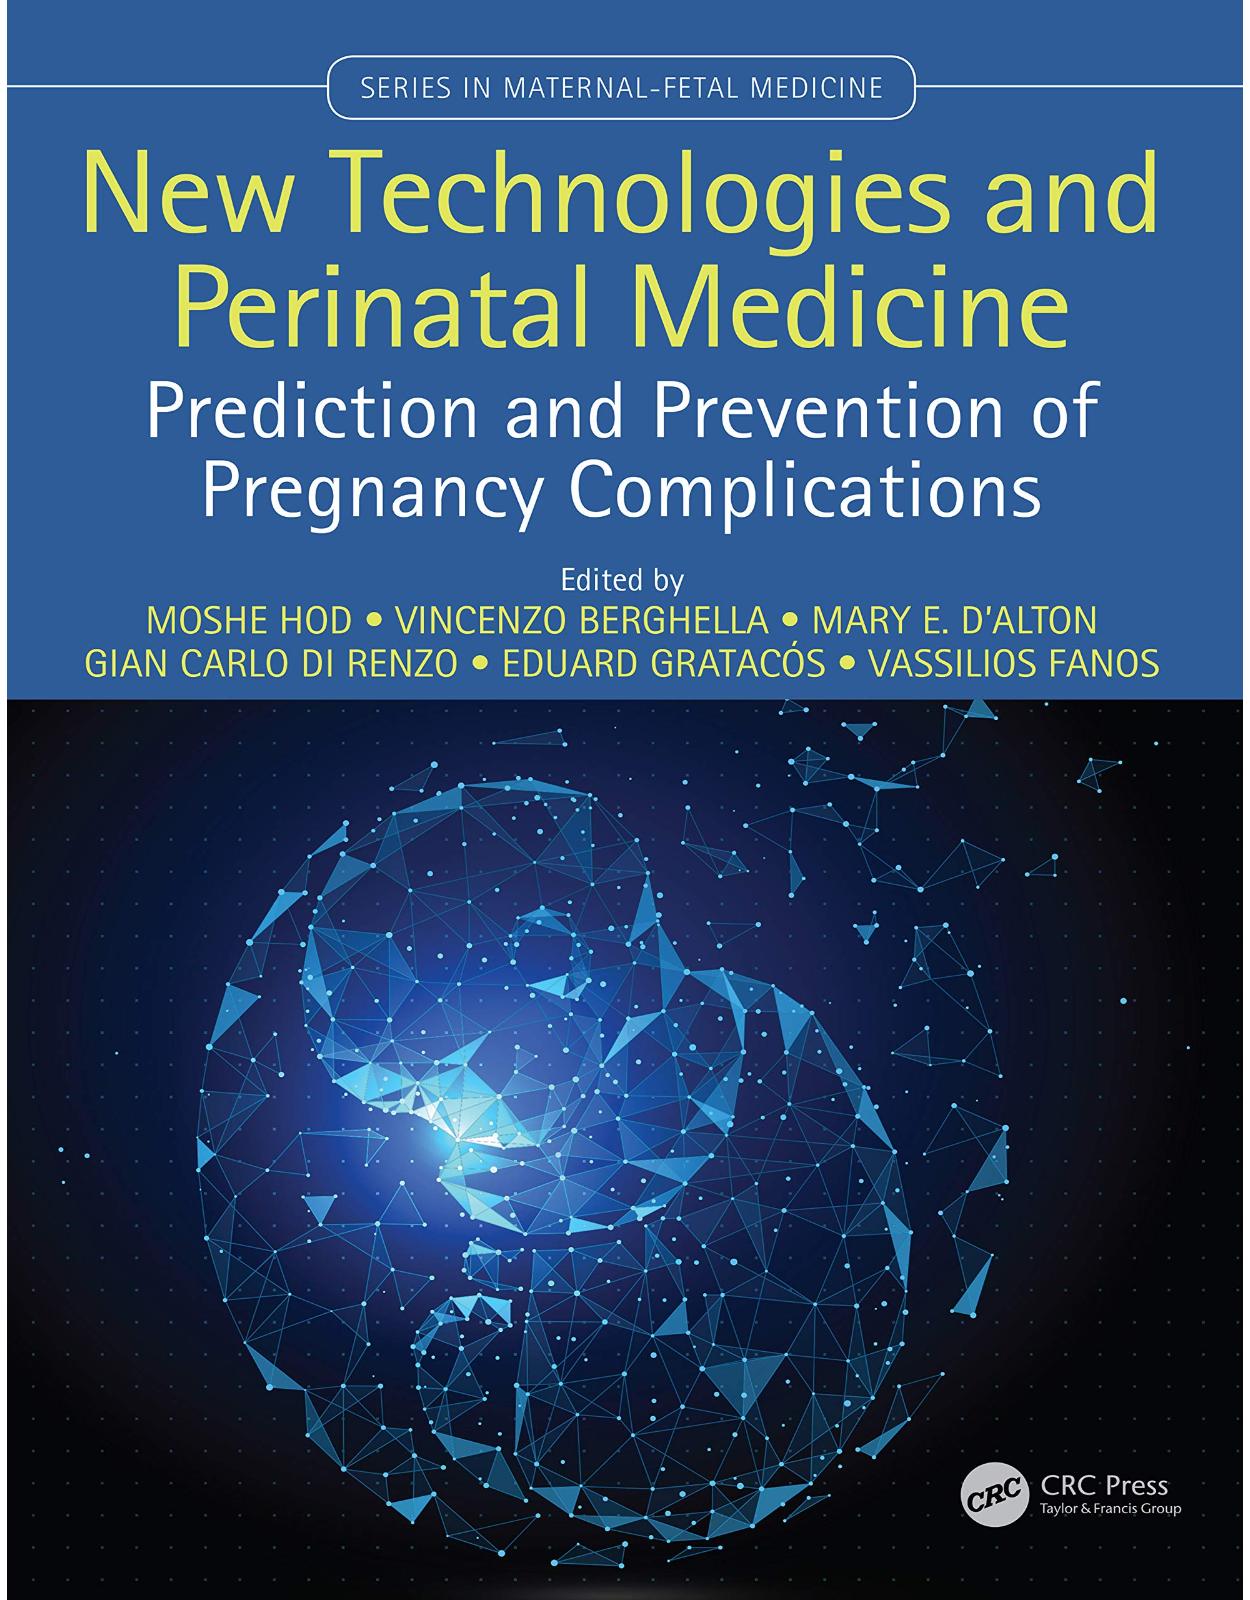 New Technologies and Perinatal Medicine: Prediction and Prevention of Pregnancy Complications (Maternal-Fetal Medicine) 